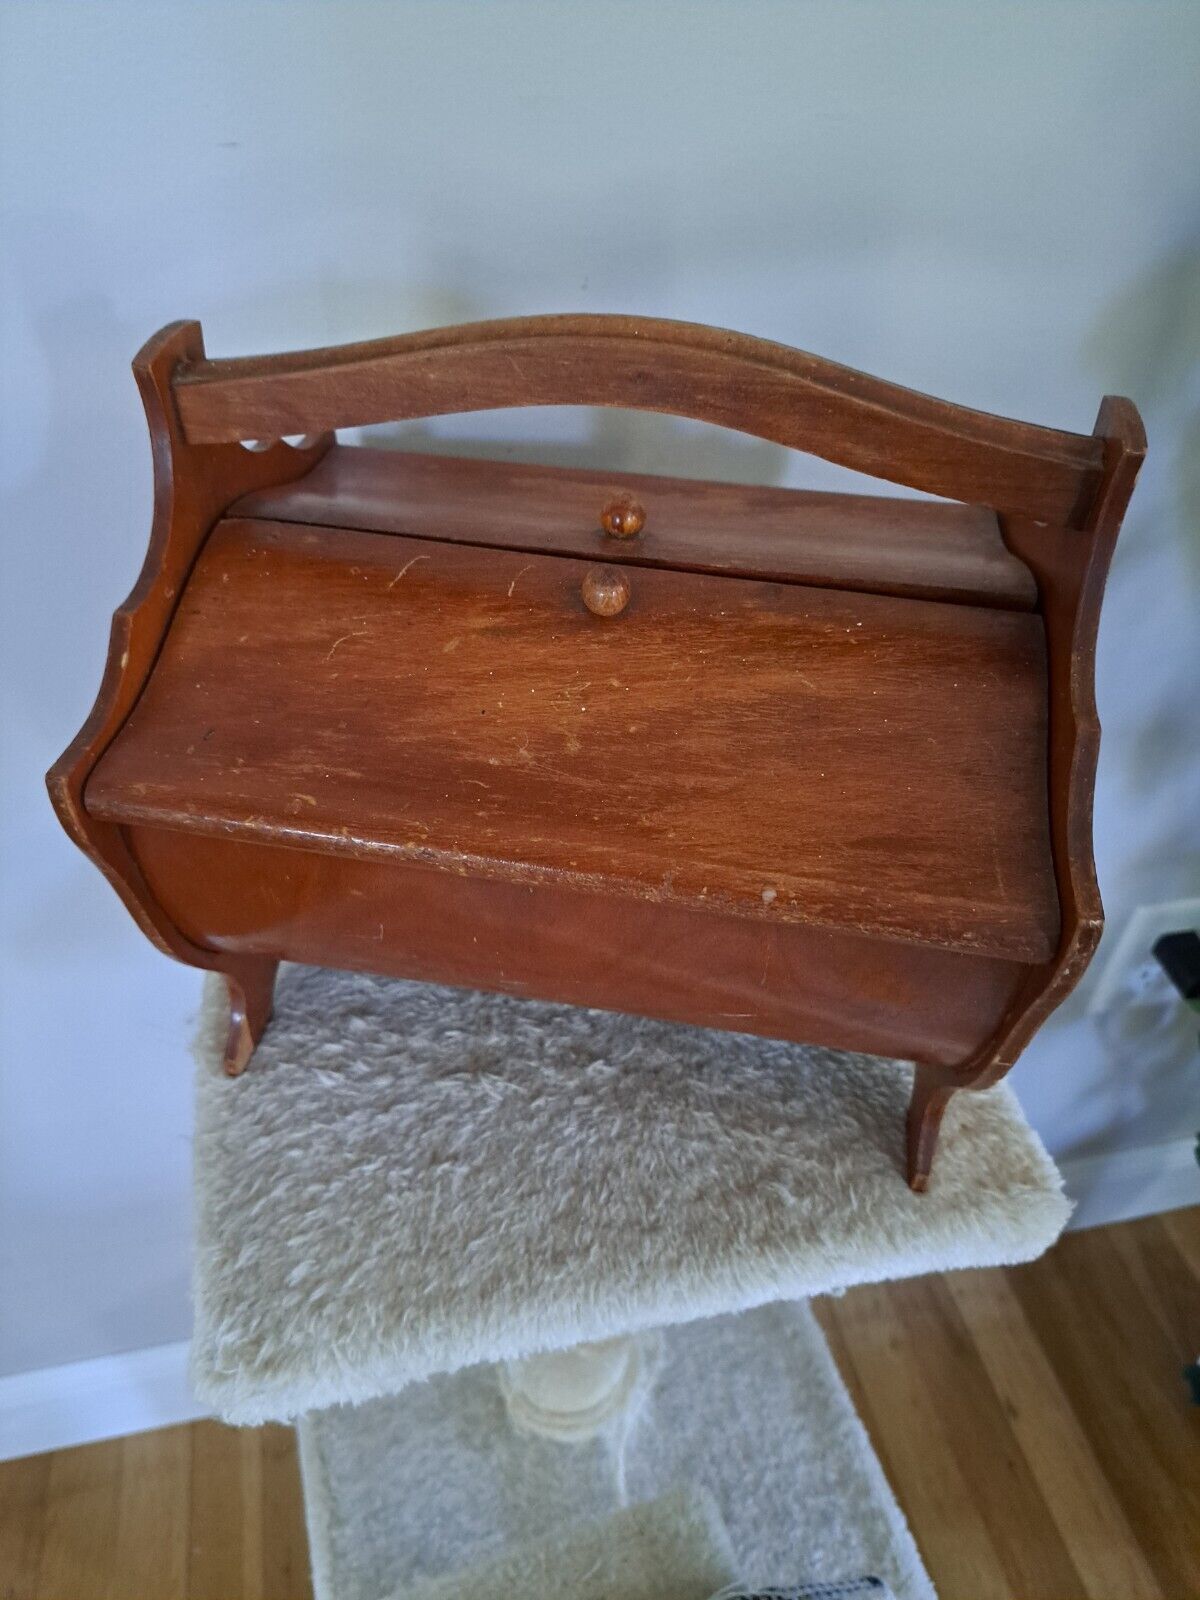 Wooden Sewing Caddy Vtg 1950\'s Hand Made, Normal Wear And Tear For It\'s Age